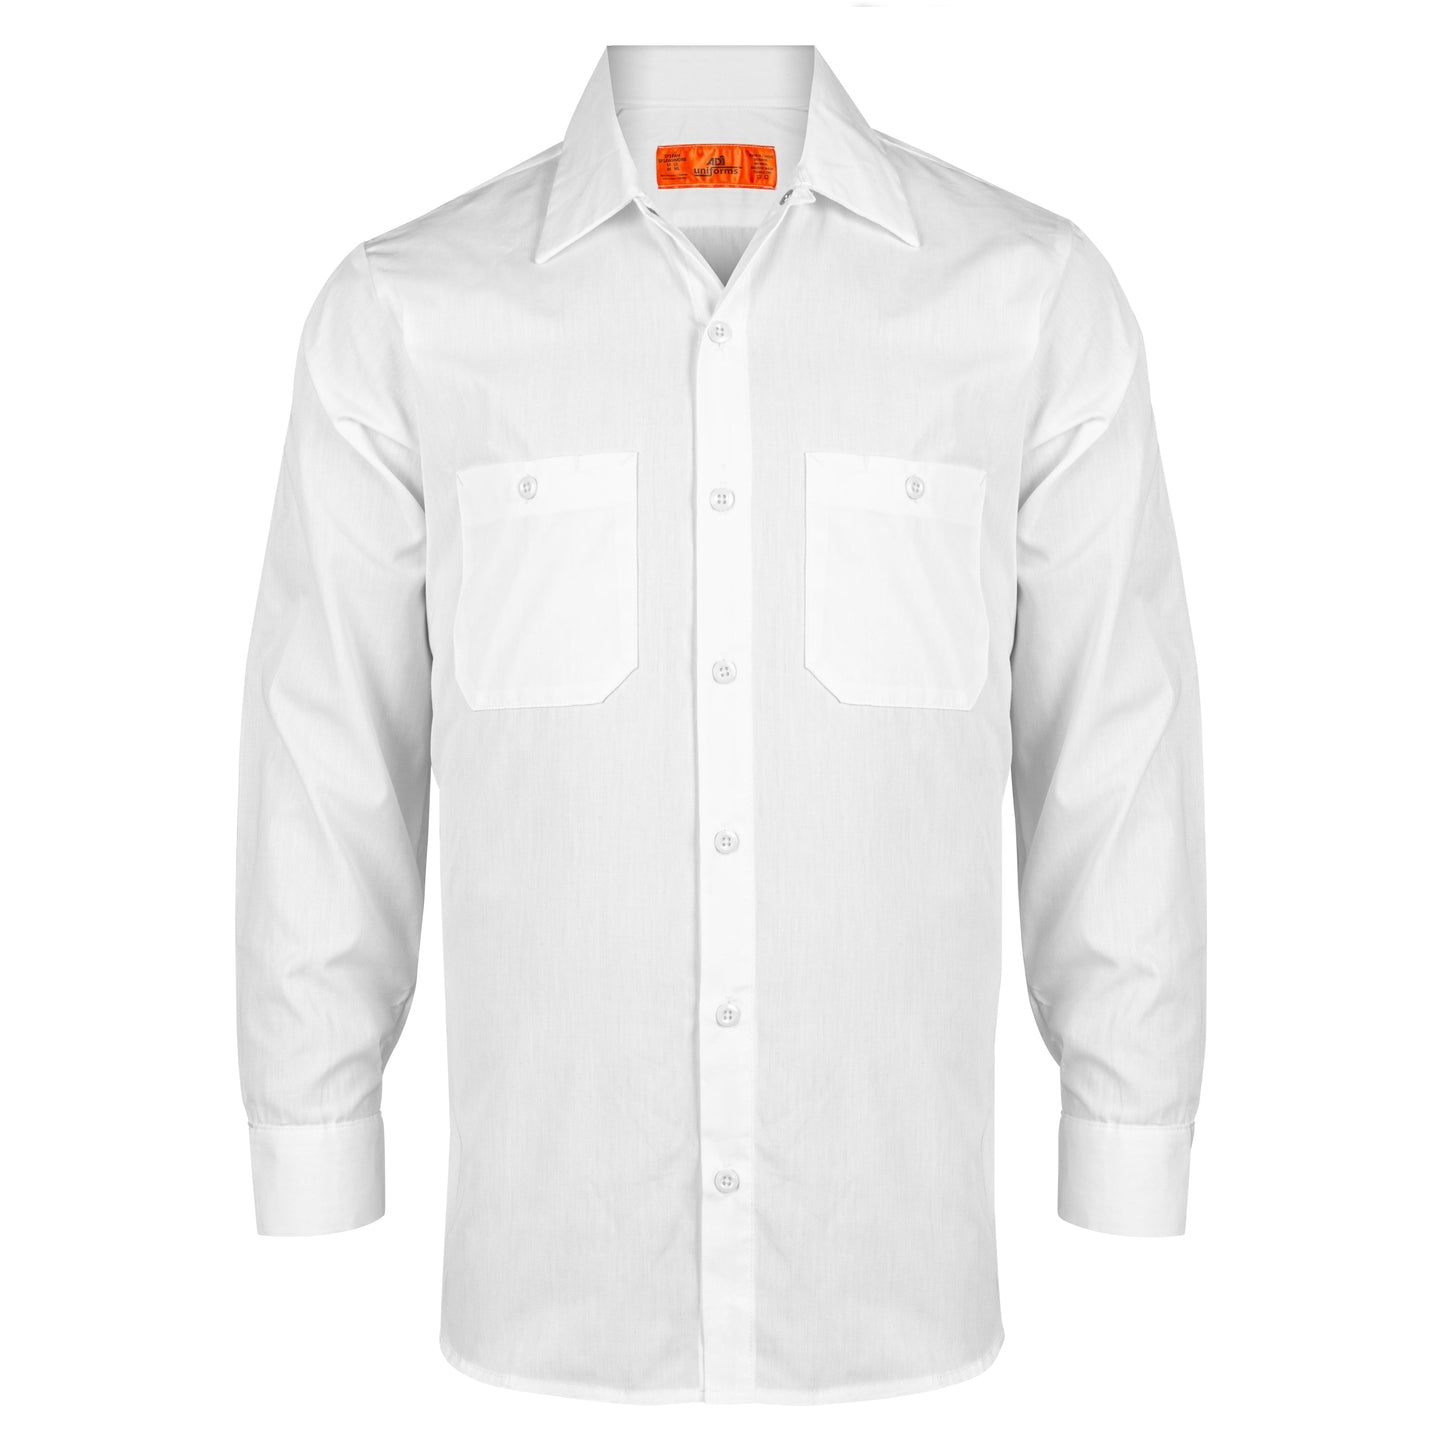 American Dawn | 2X-Large White Work Shirt With Long Sleeves And 2 Pockets